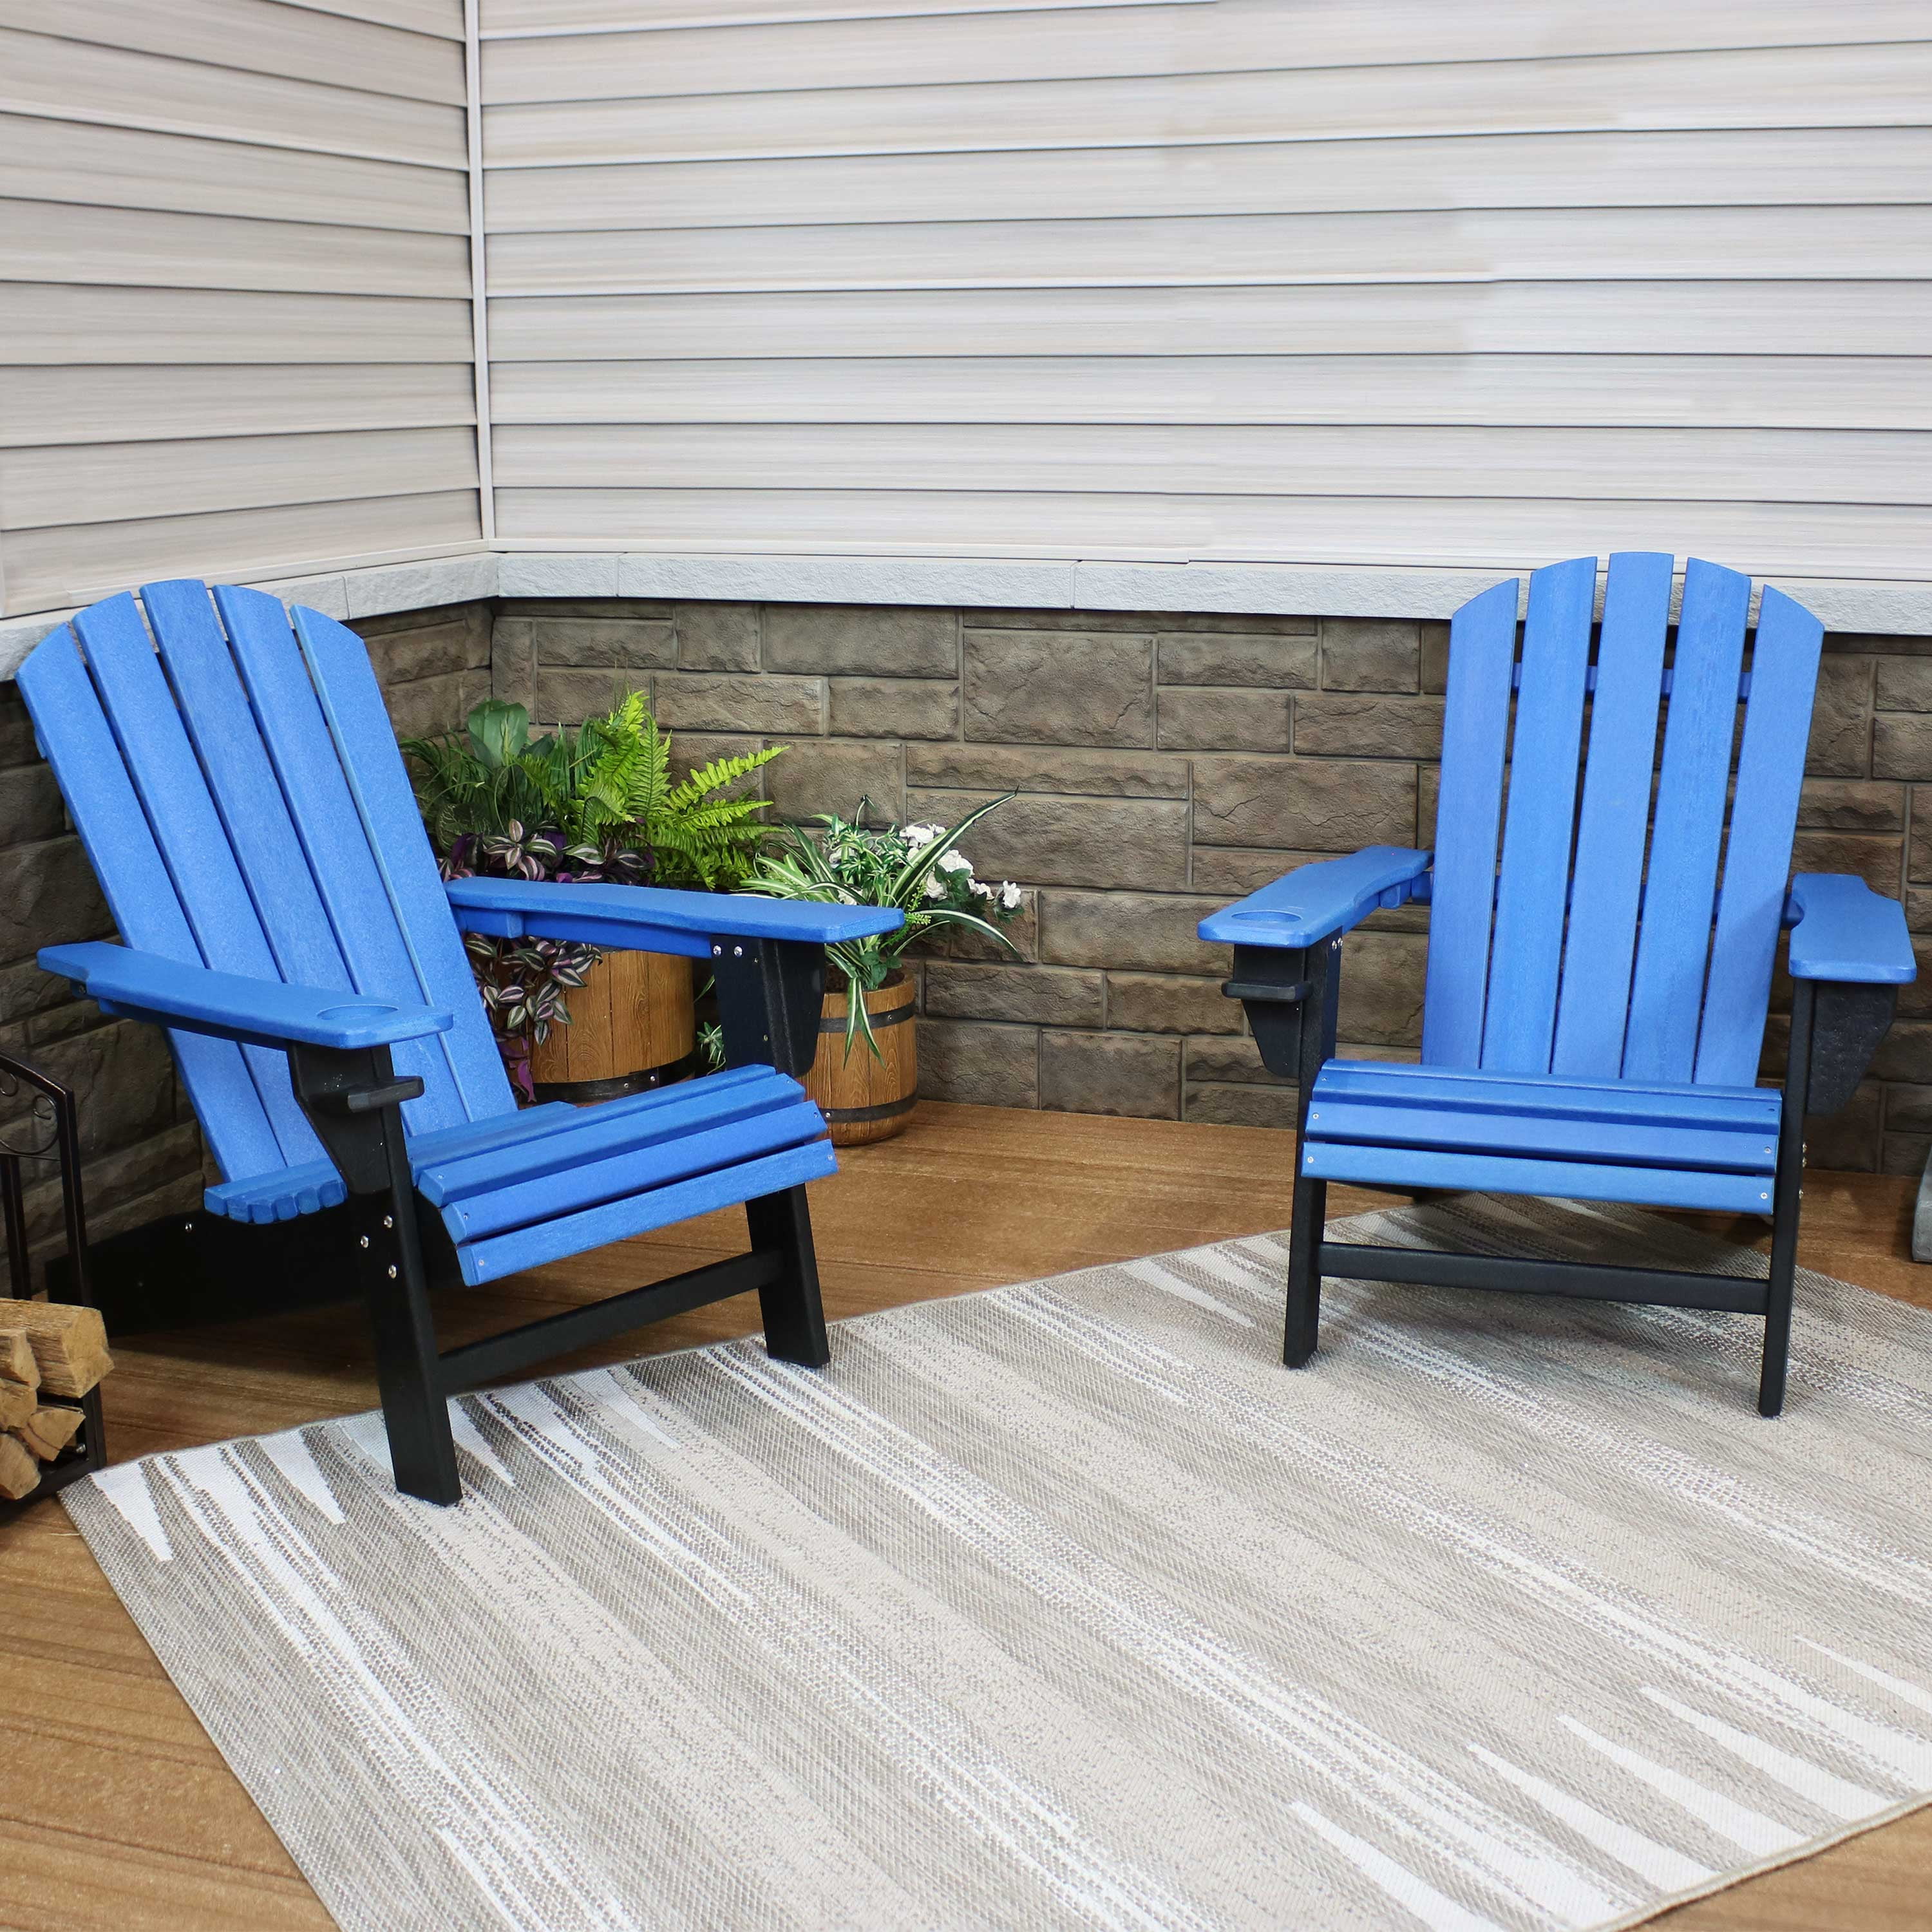 Sunnydaze All-Weather 2-Color Outdoor Adirondack Chair with Drink ...